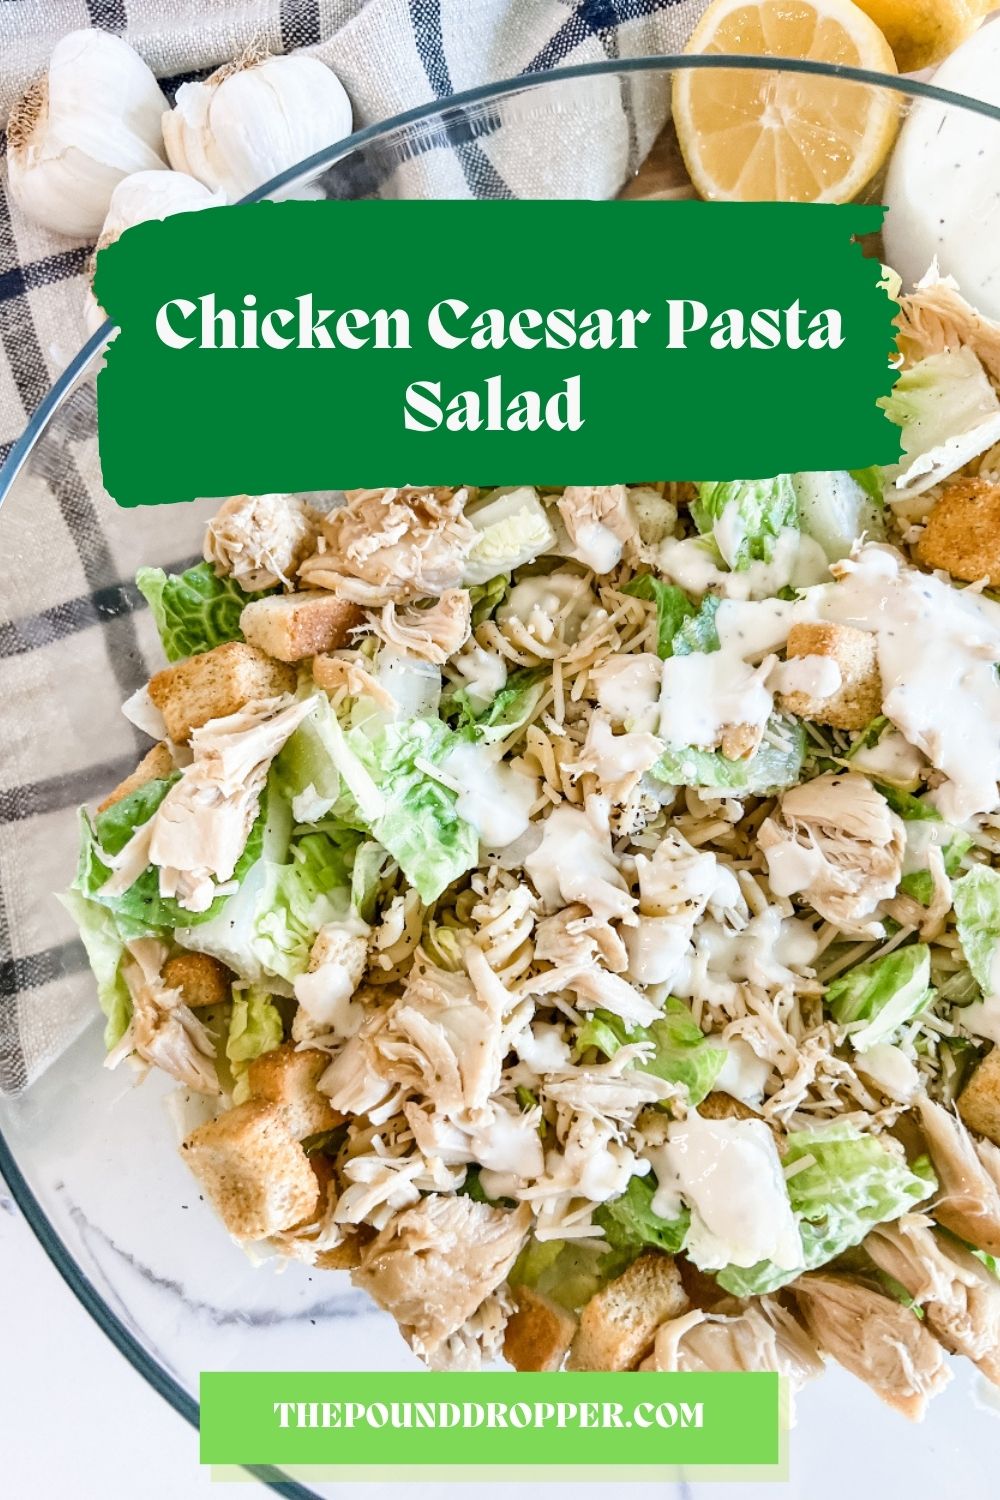 This Chicken Caesar Pasta Salad is a combination of your favorite Caesar salad and traditional pasta salad. Perfect for family gatherings, summer BBQ's, and picnics! via @pounddropper